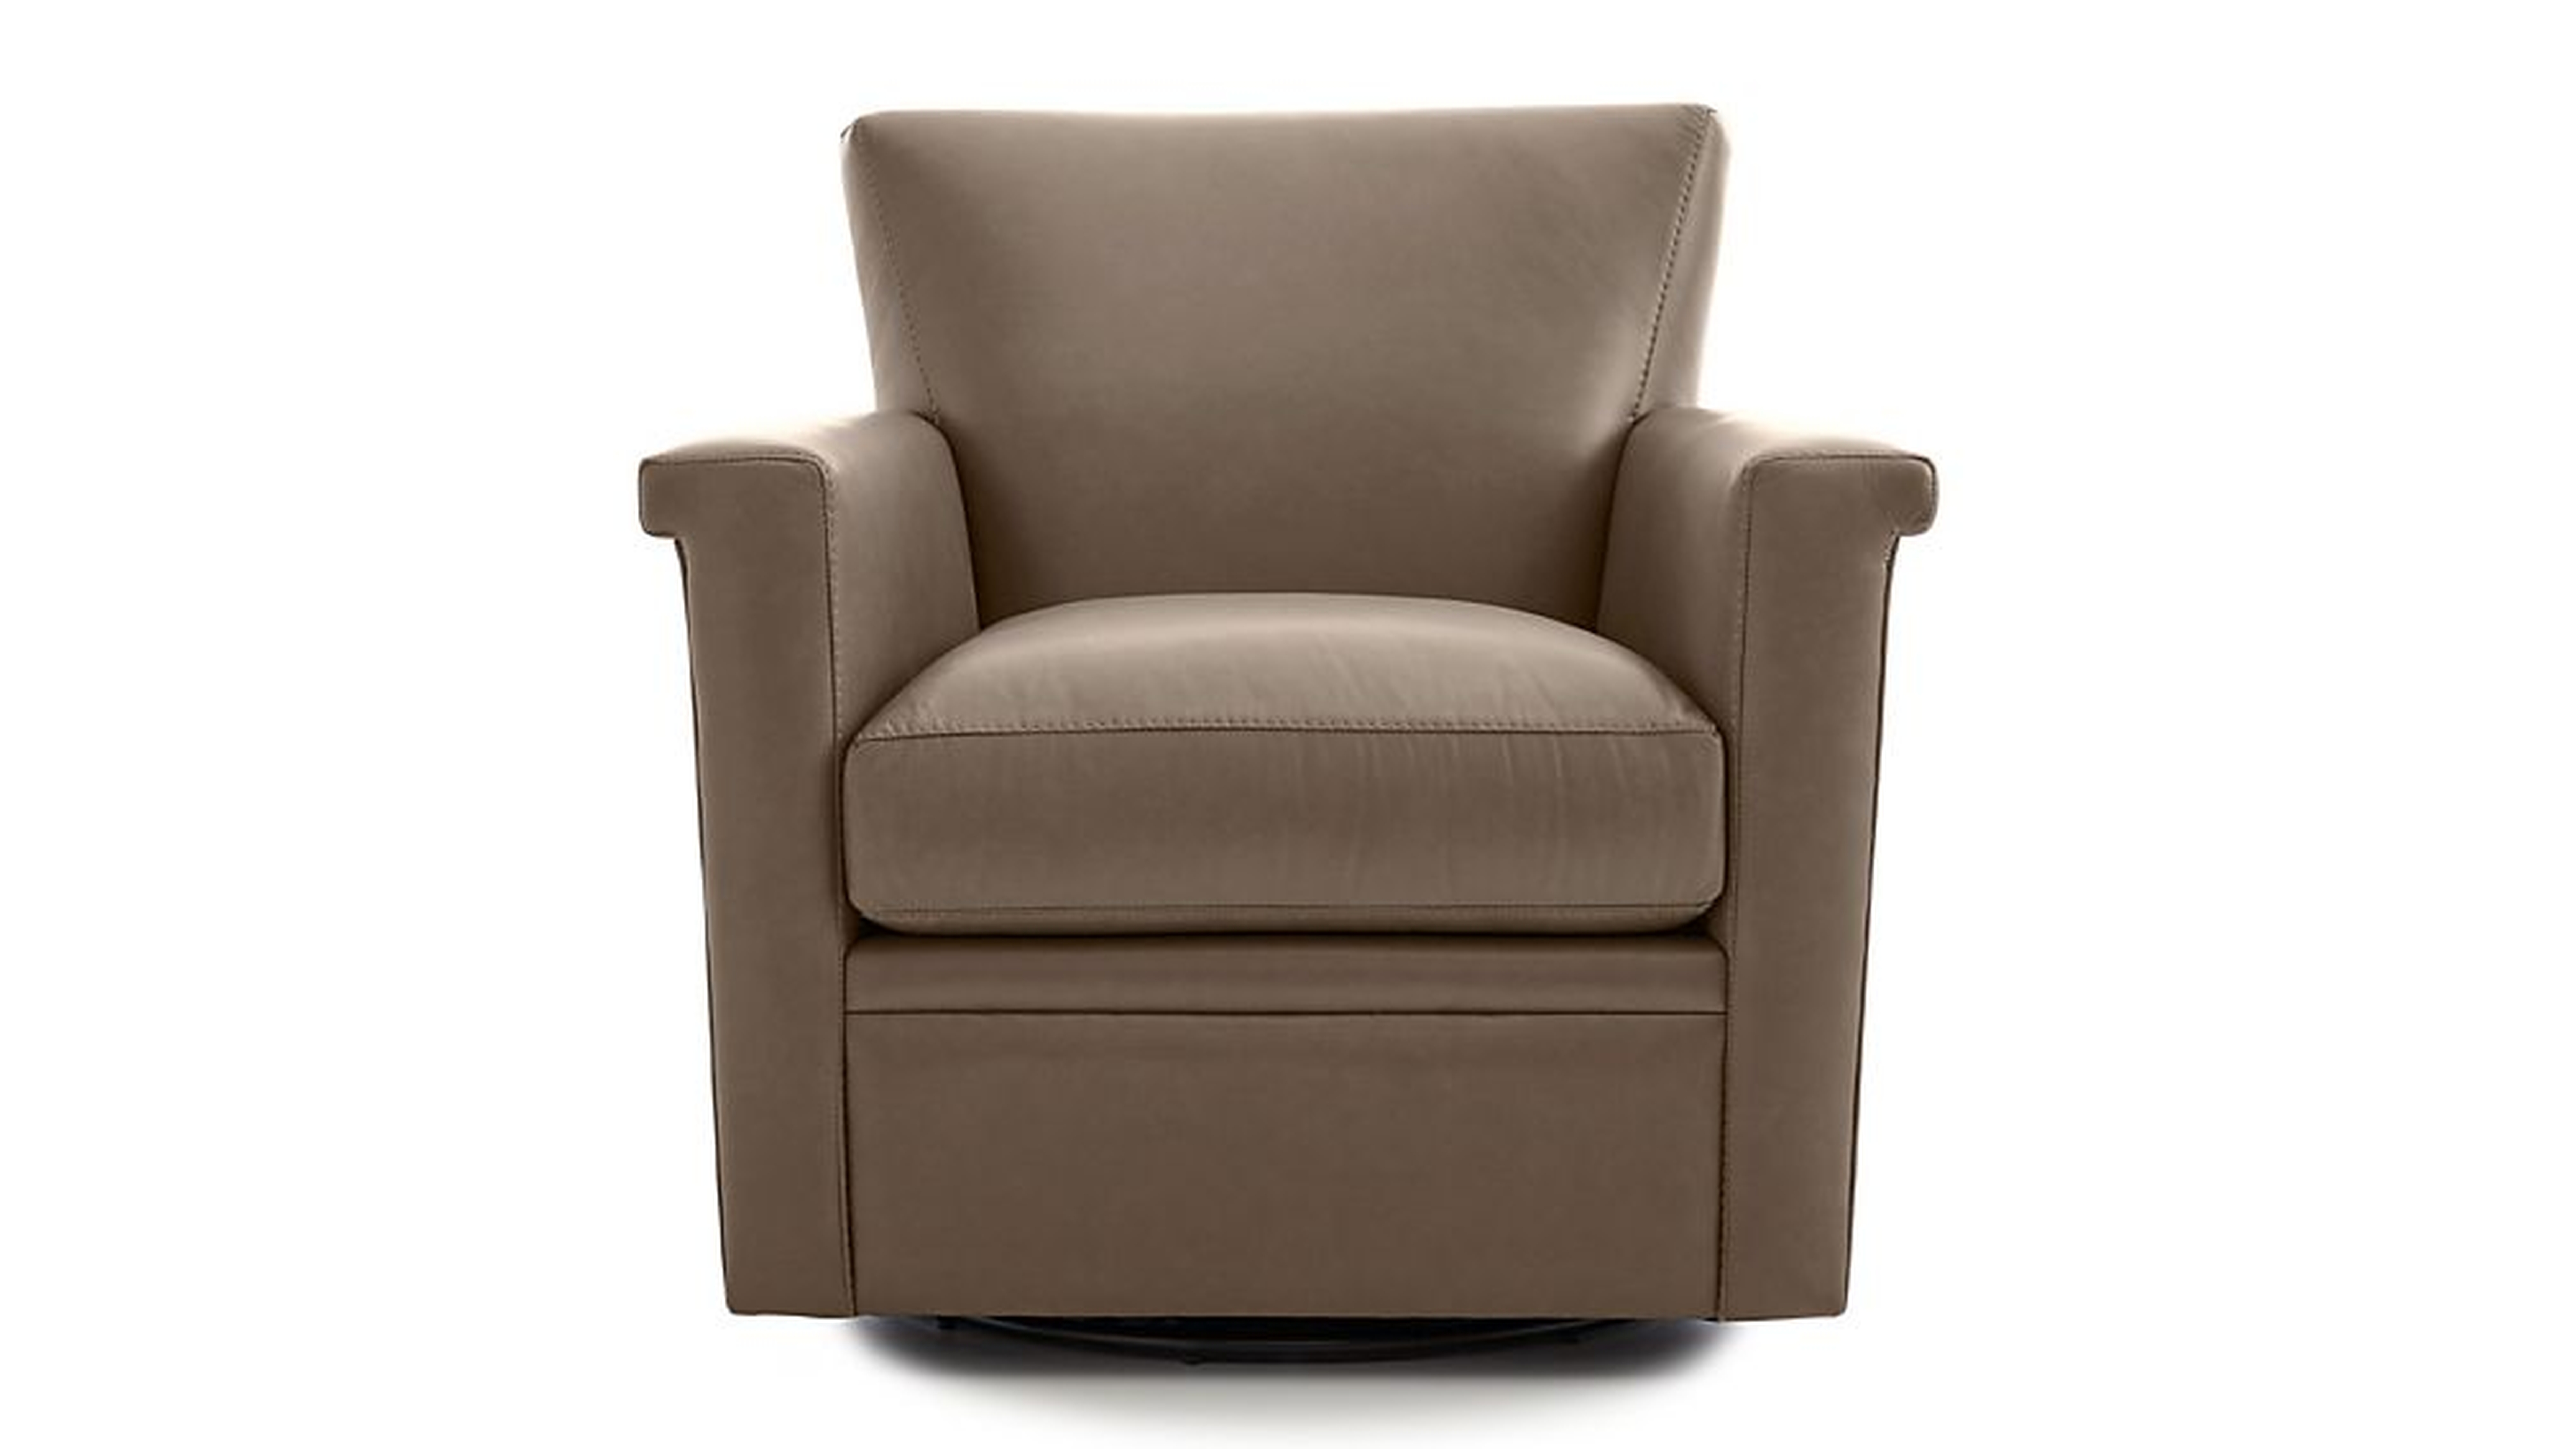 Declan Leather 360 Swivel Chair, Smoke - Crate and Barrel